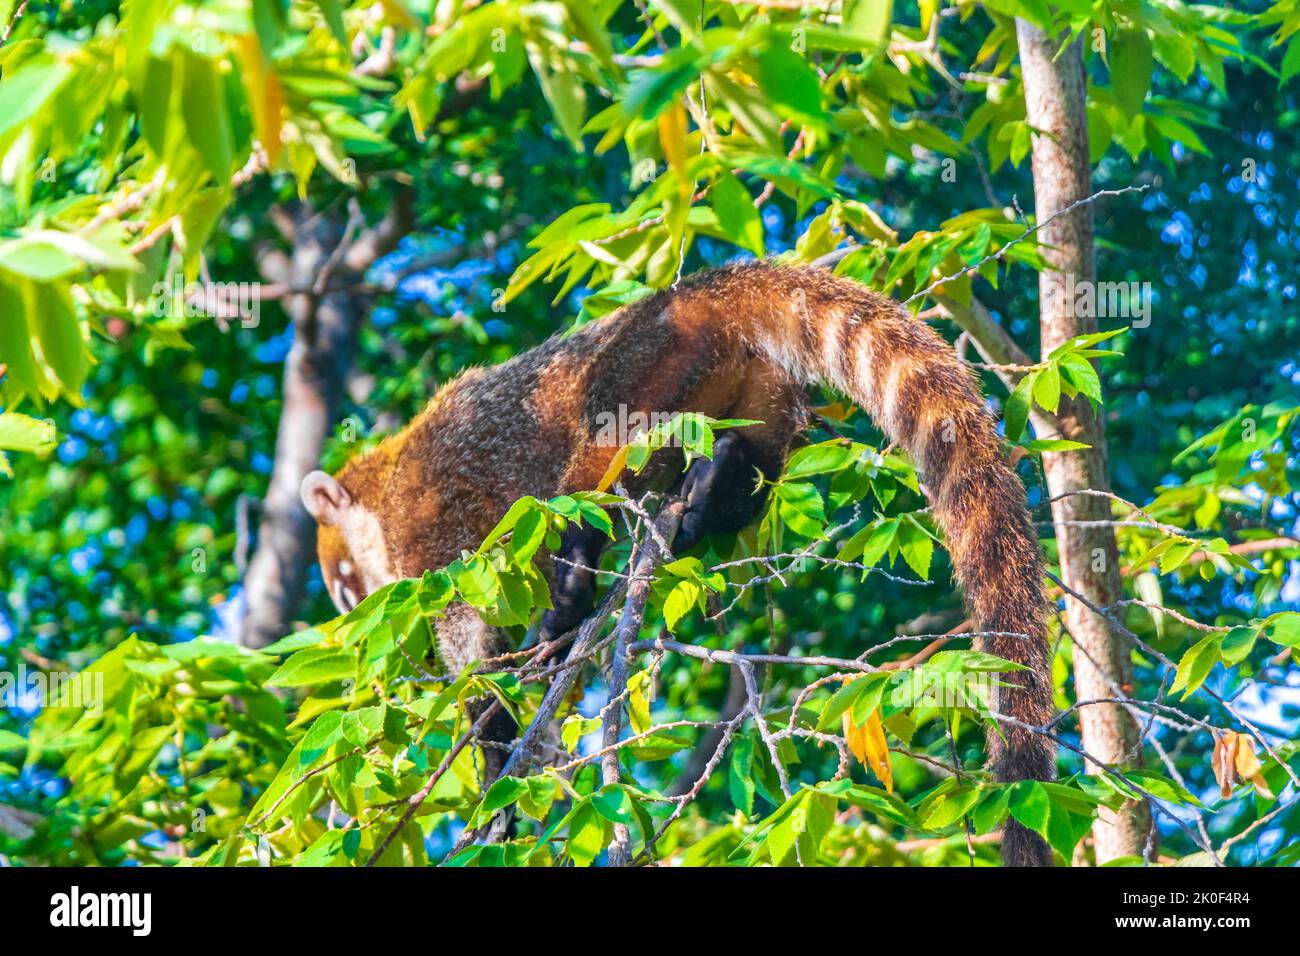 Coati coatis climb trees and branches and eat and search for fruits in tropical jungle in Playa del Carmen Quintana Roo Mexico. Stock Photo